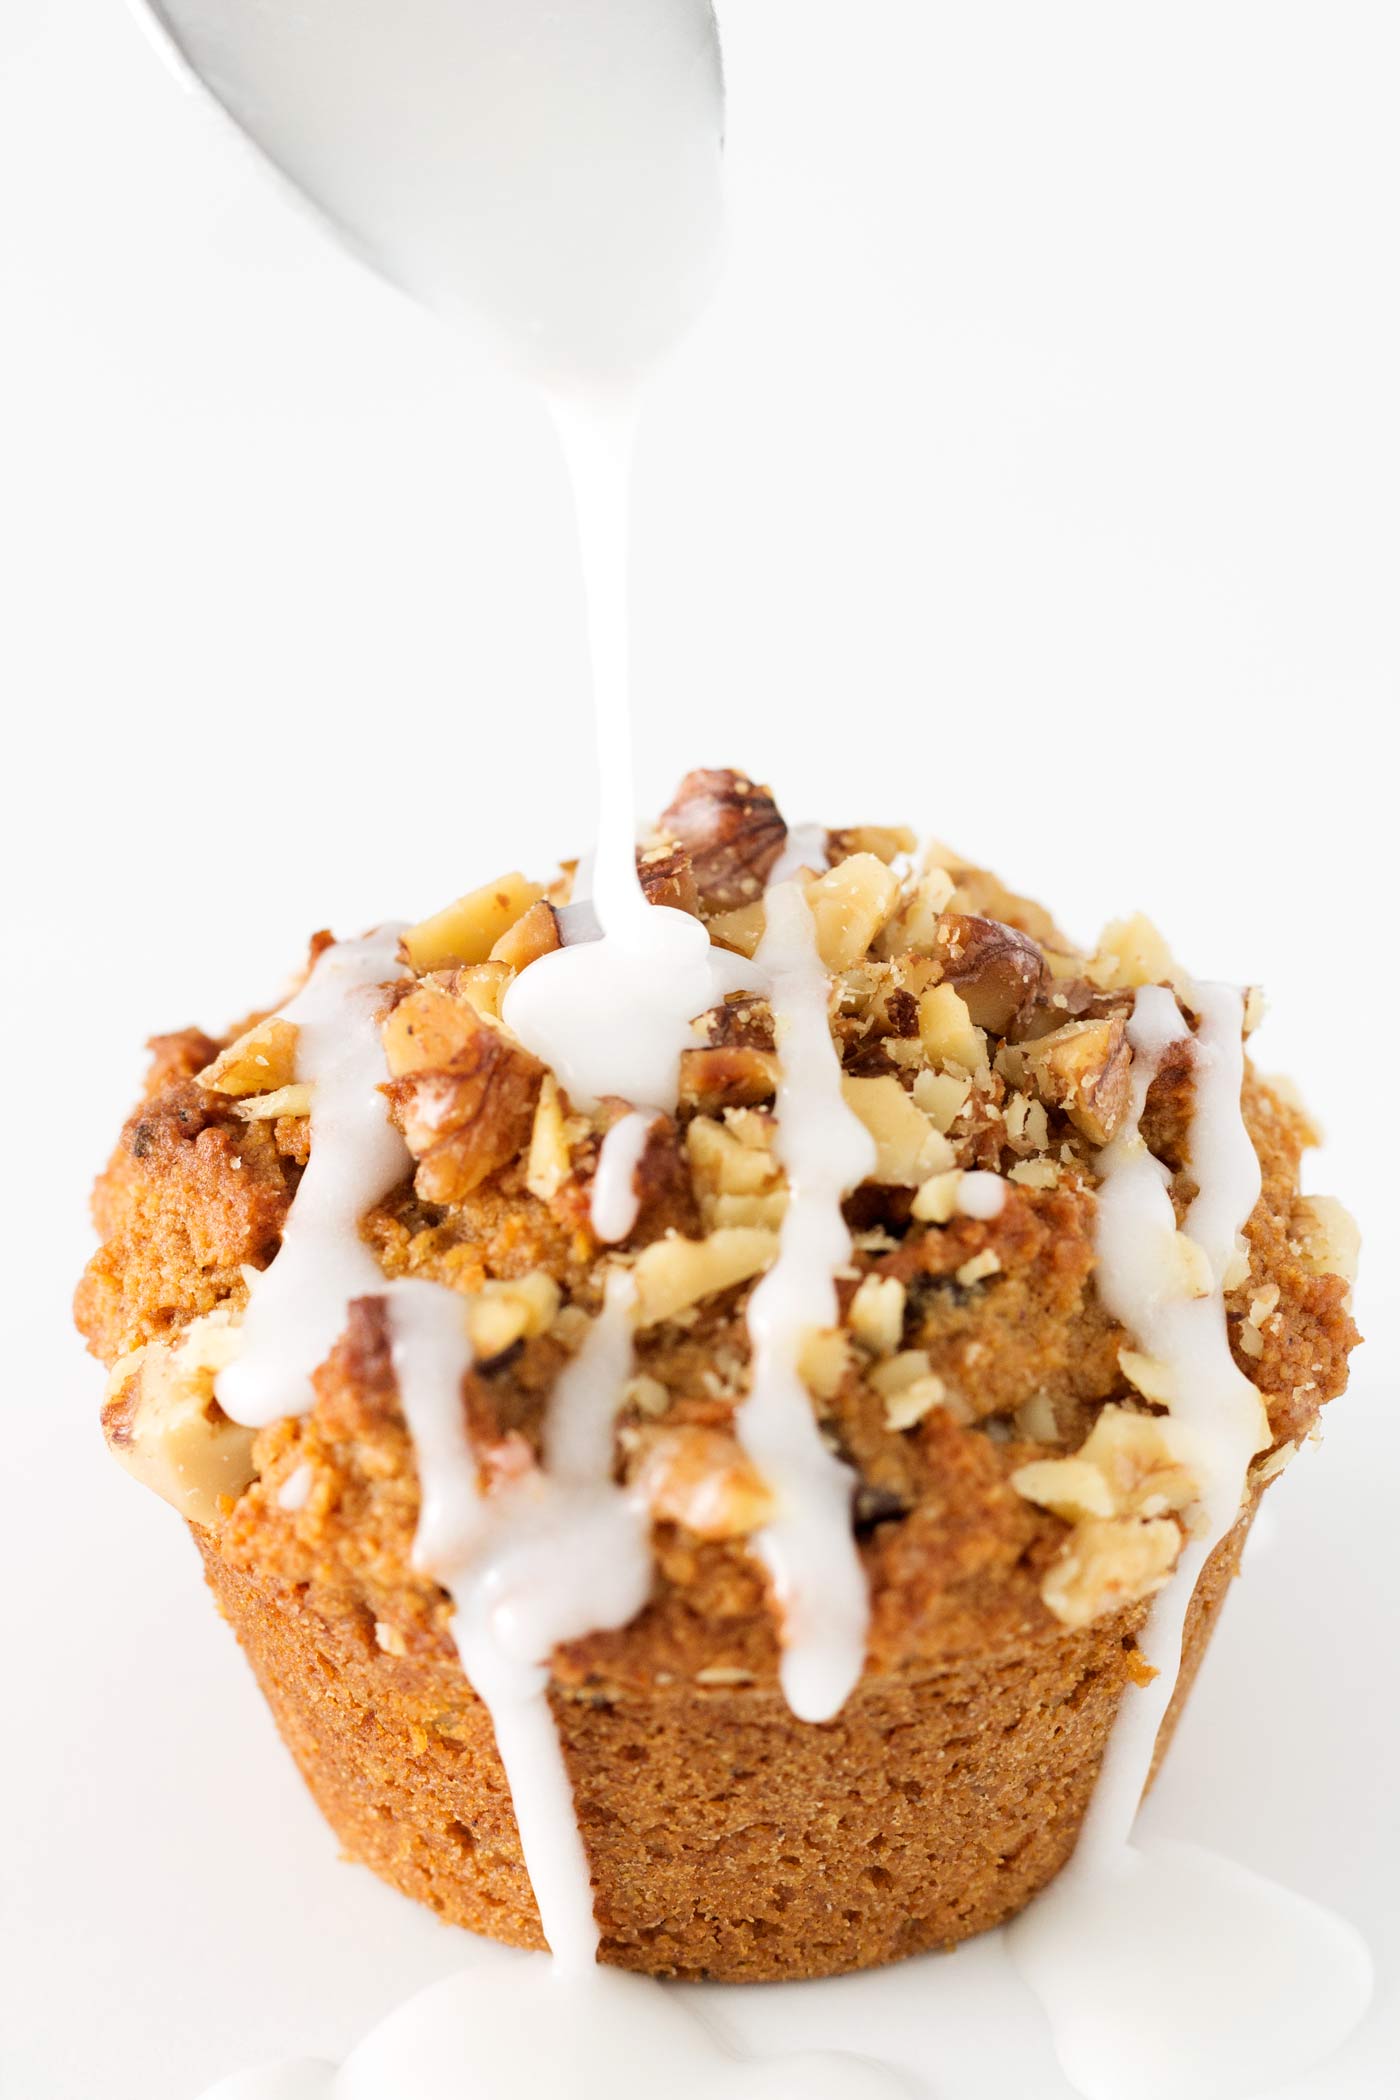 A seasonal favorite made healthy! These pumpkin chocolate chip muffins are easy to make, paleo, gluten free, and dairy free!